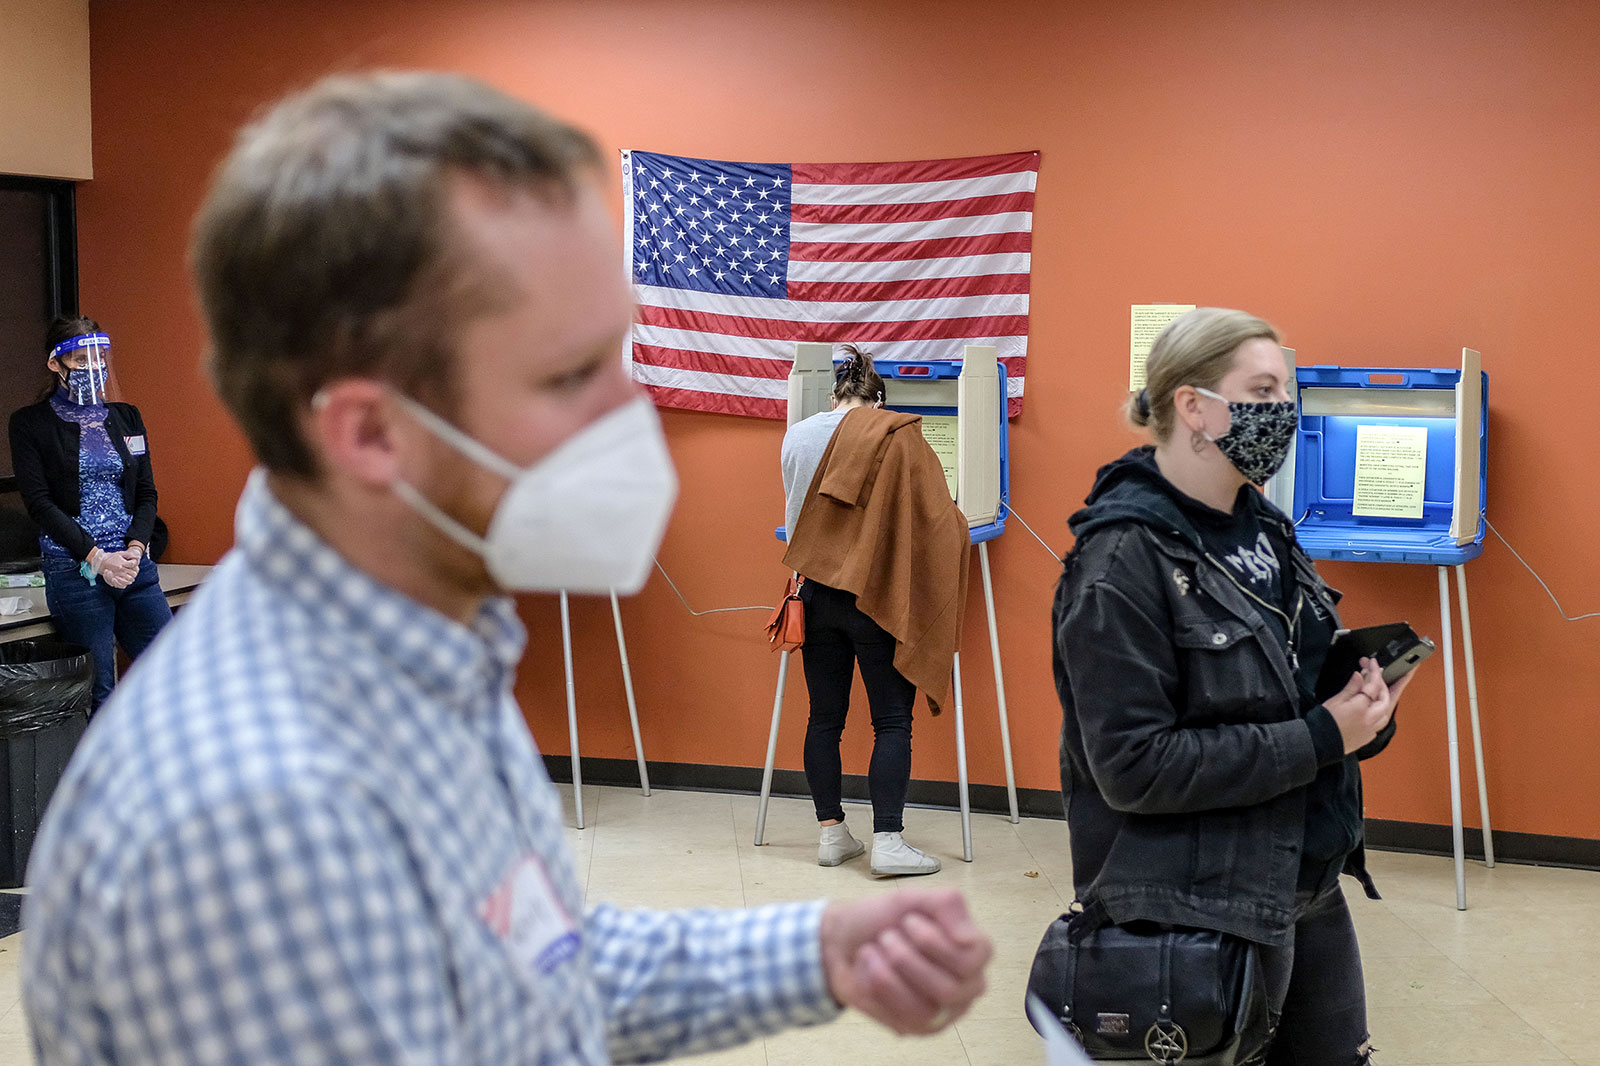 Voters cast their ballots at a polling location in Milwaukee on Tuesday, November 3.